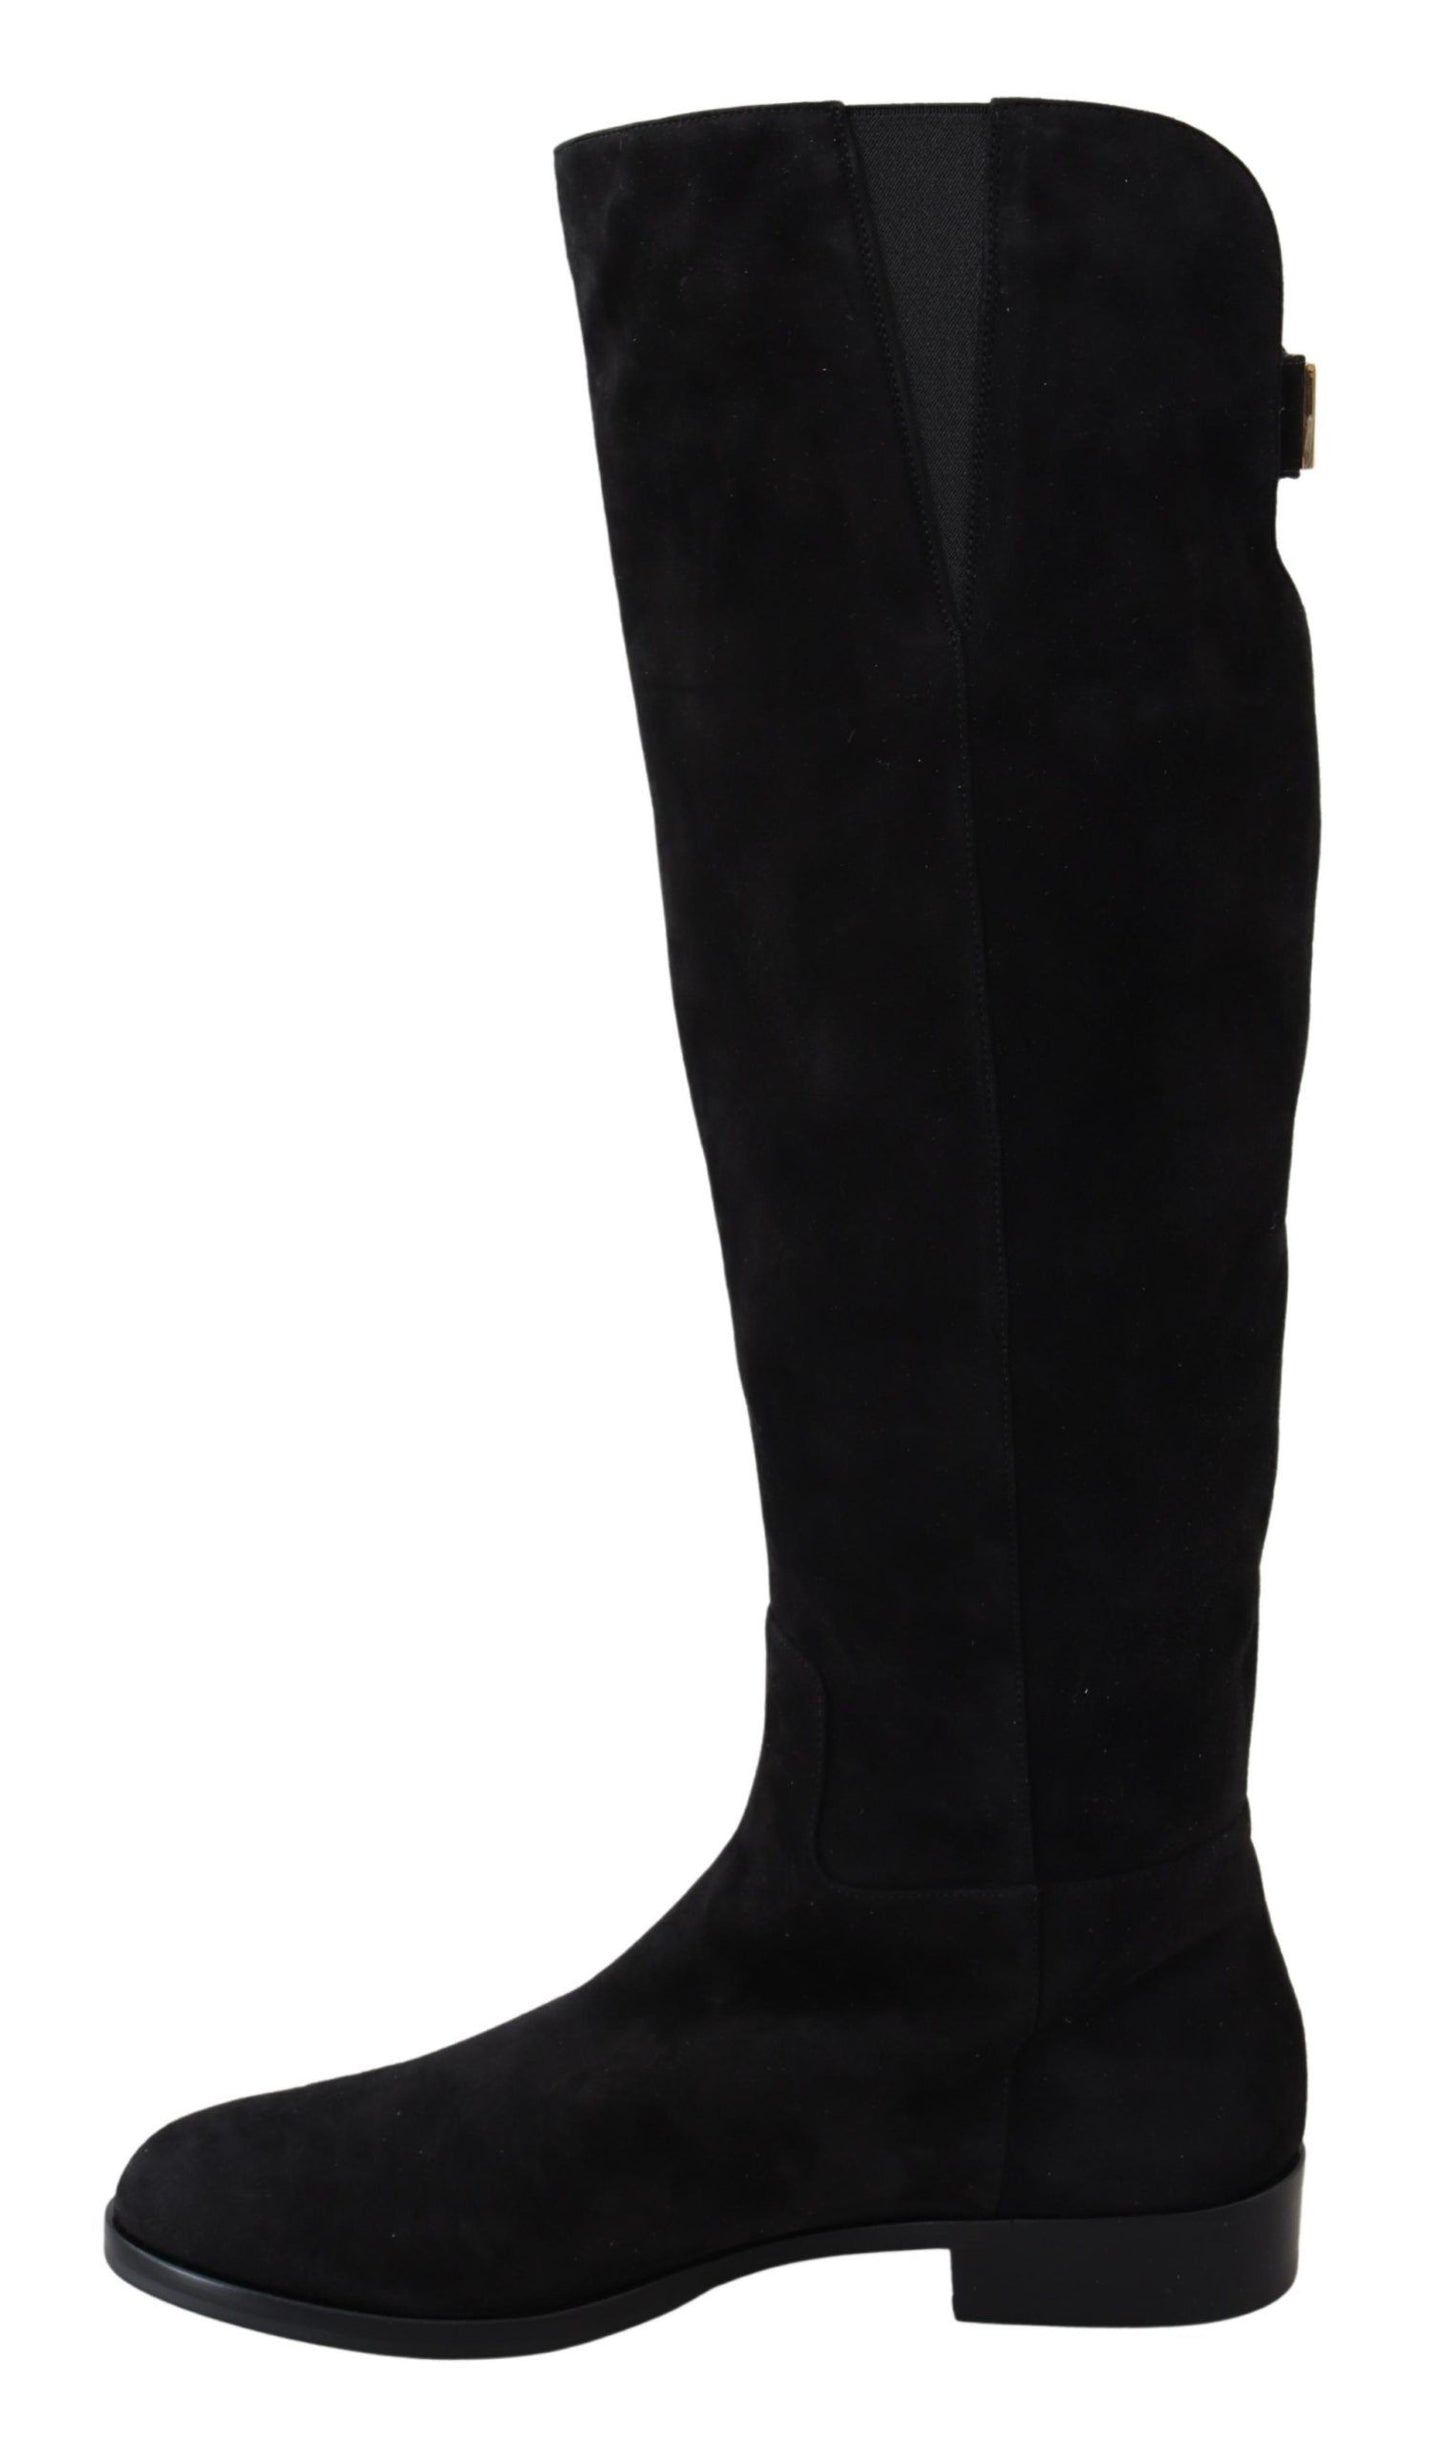 Elegant Knee High Suede Leather Boots